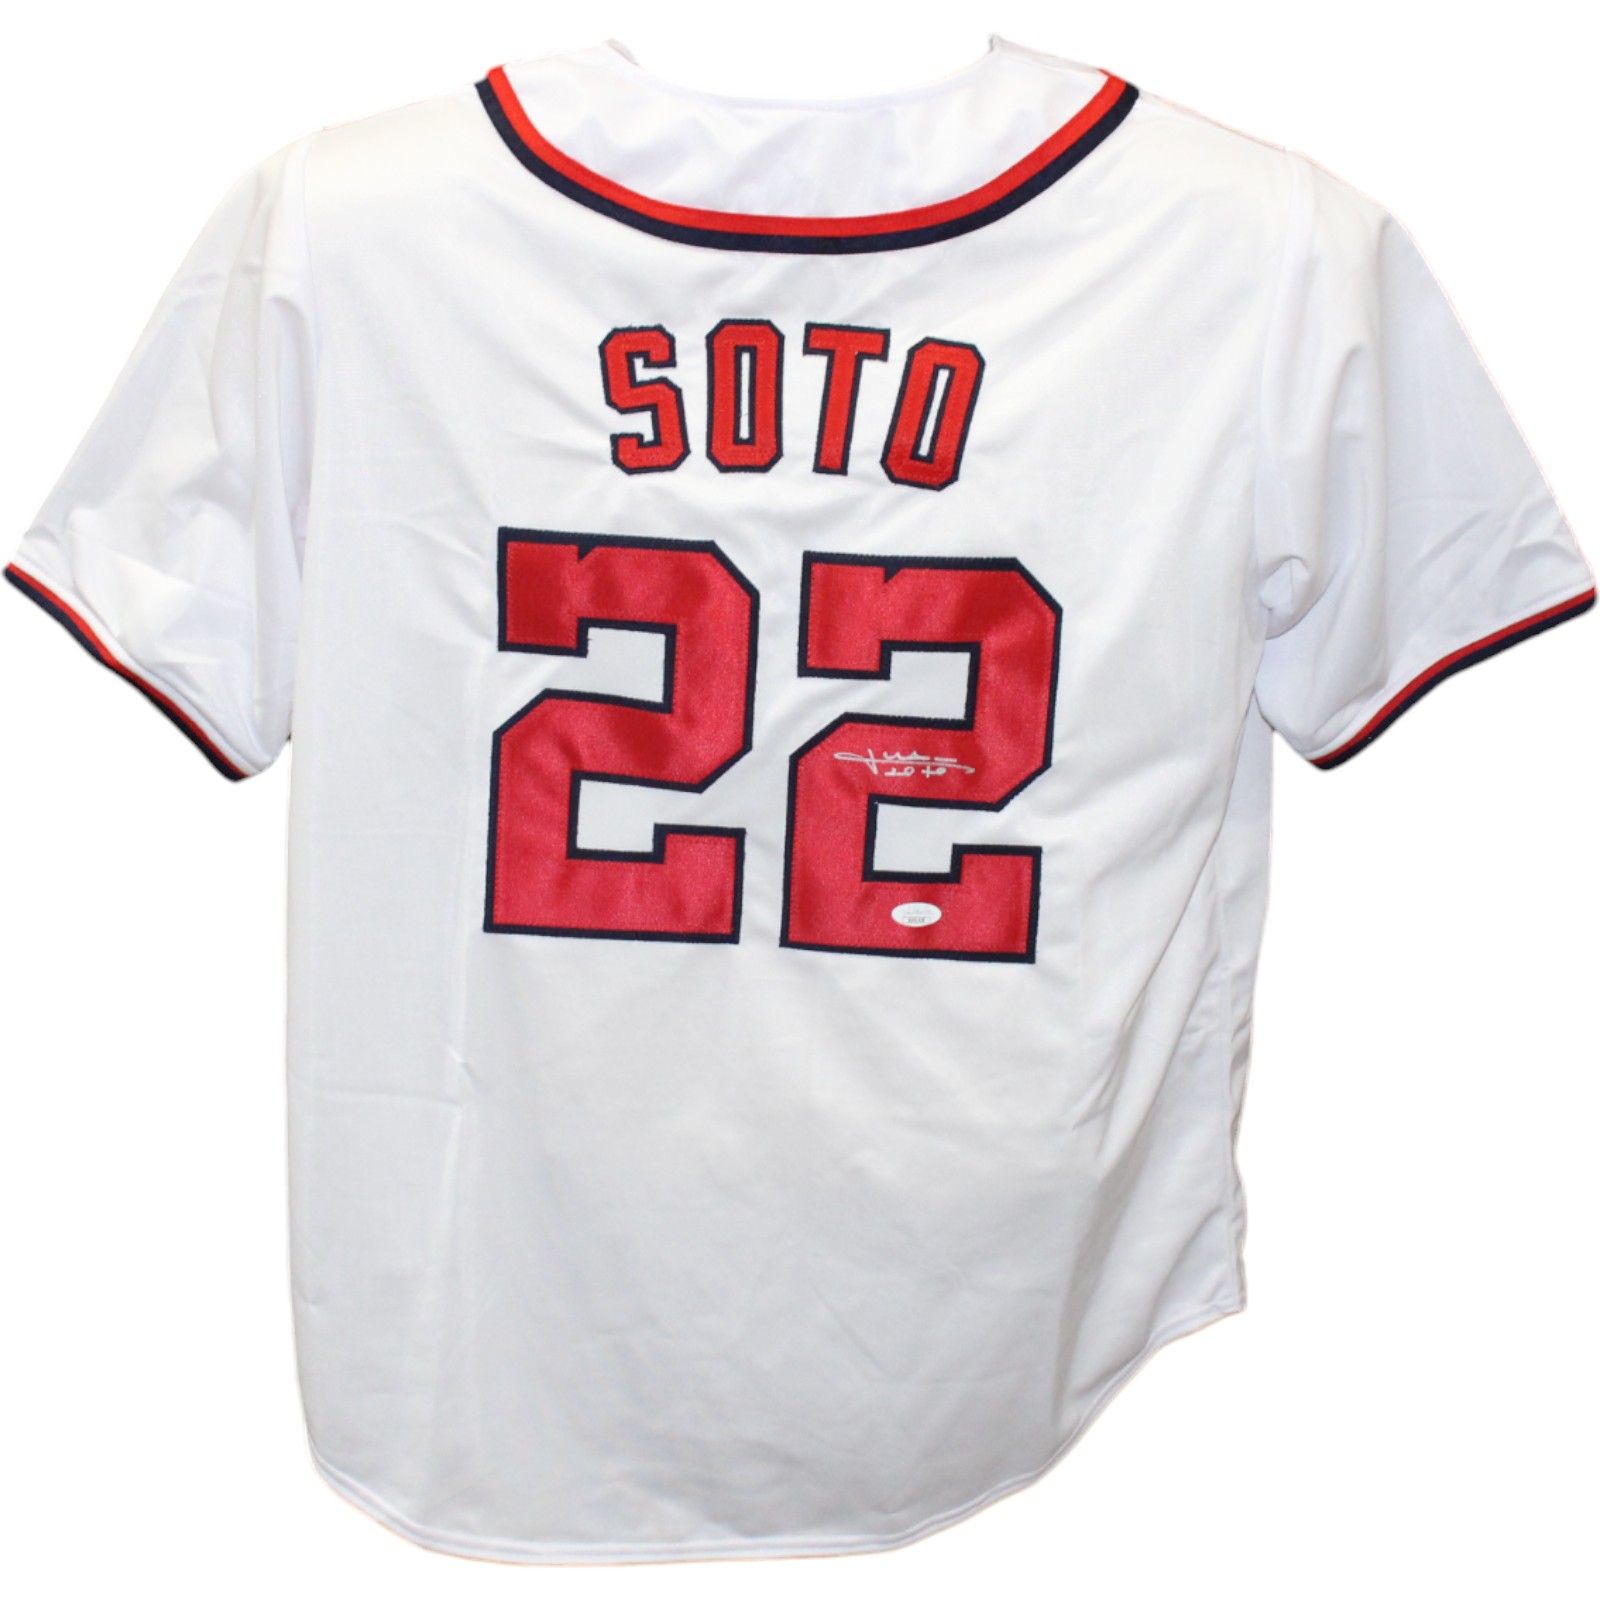 Juan Soto Autographed/Signed Pro Style White Jersey Beckett